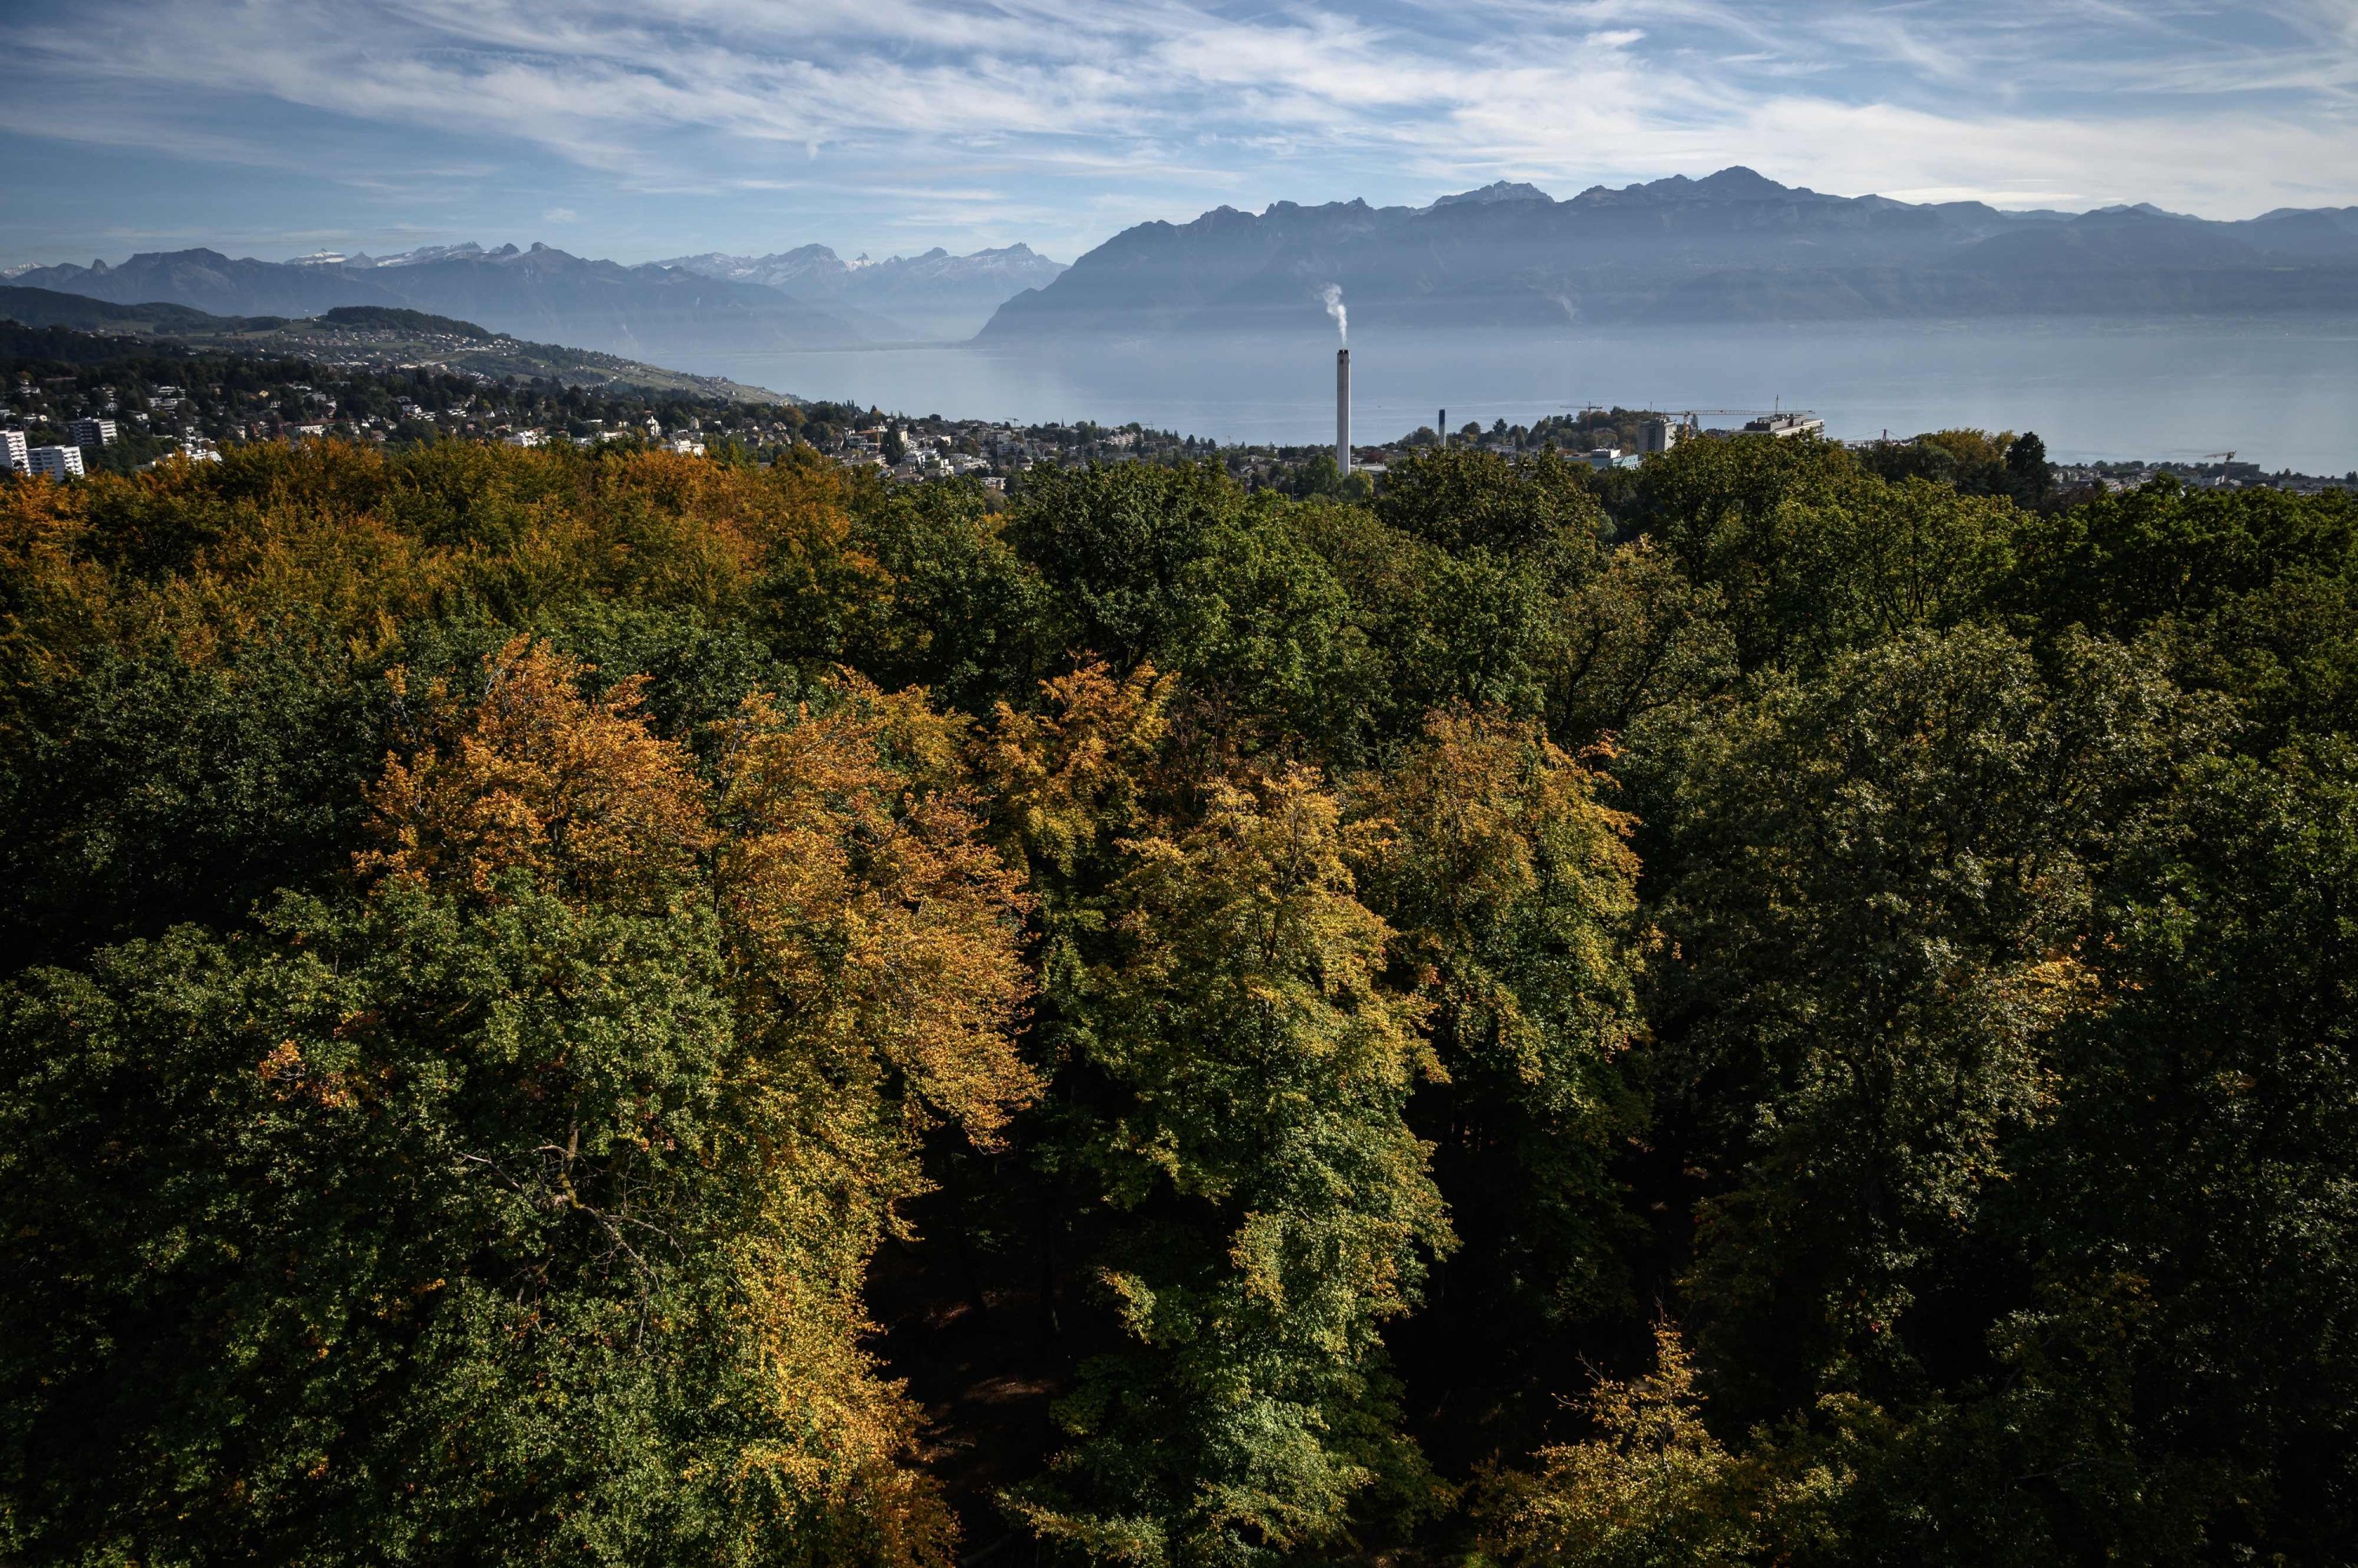 The dioxin-polluted forest of Sauvabellin seen from the wooden Tour of Sauvabellin, Lausanne, Switzerland, Oct. 15, 2021. (AFP Photo)